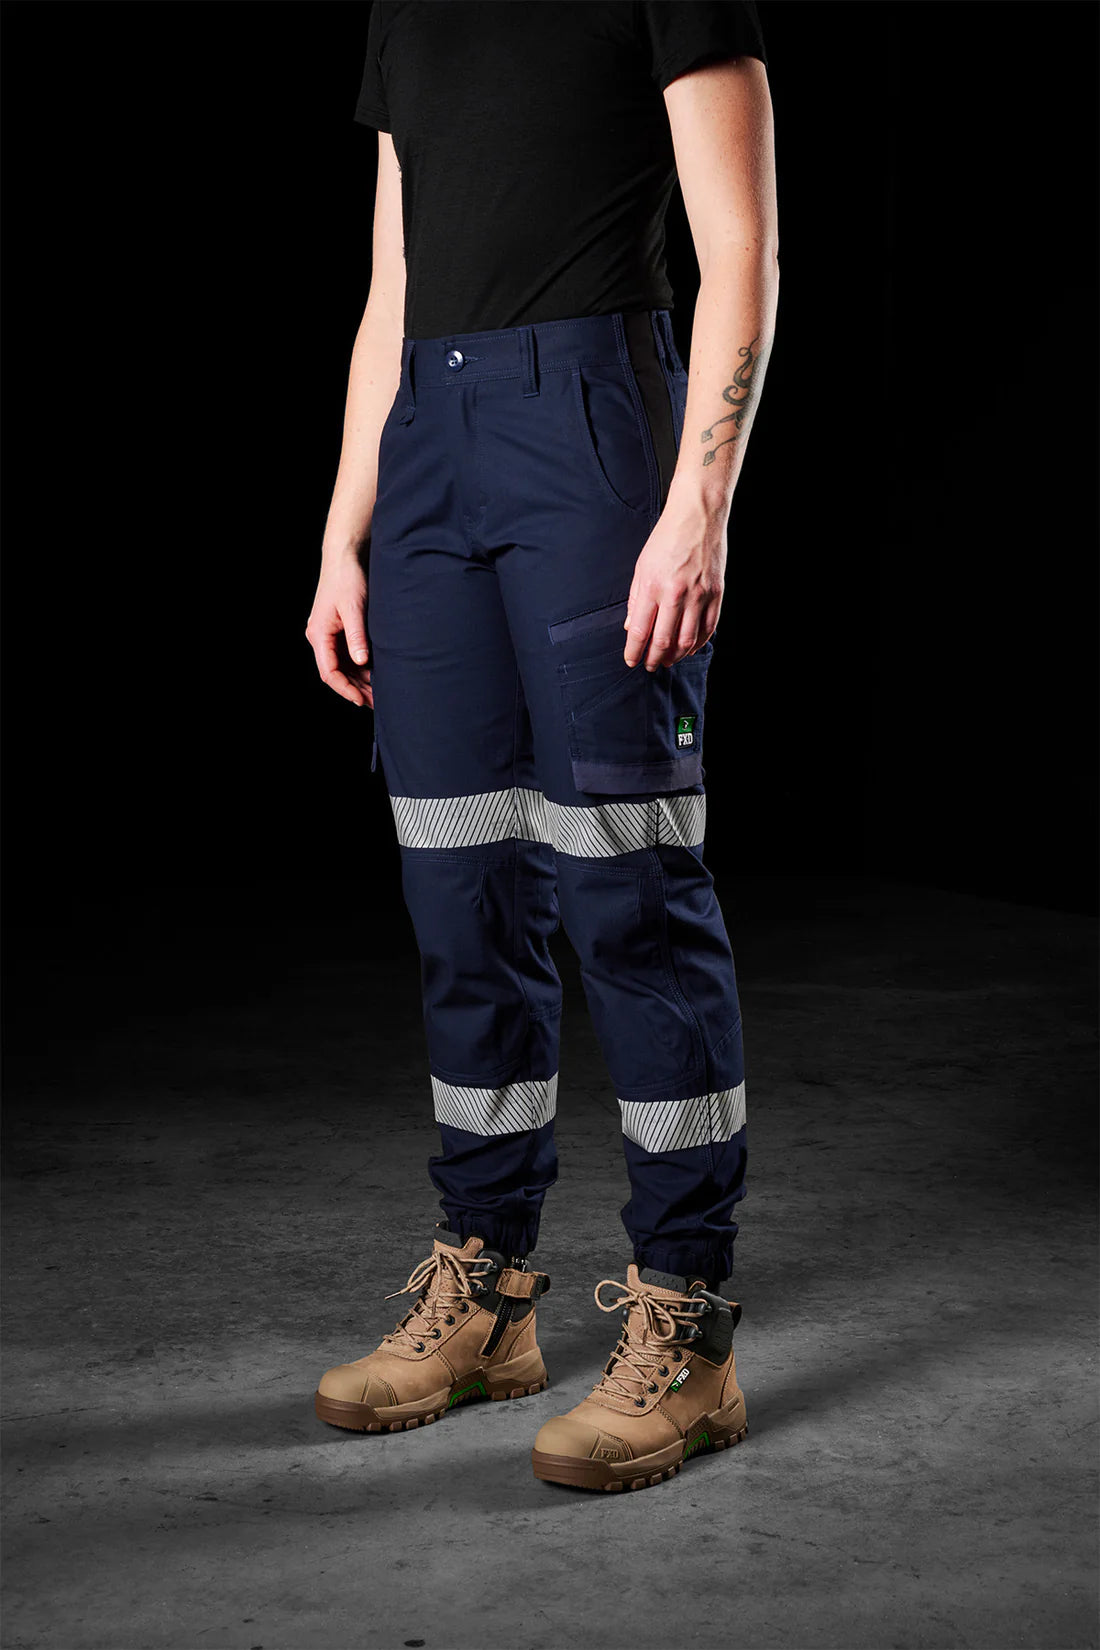 Ladies Ripstop Reflective Cuffed Stretch Work Pants - made by FXD Workwear